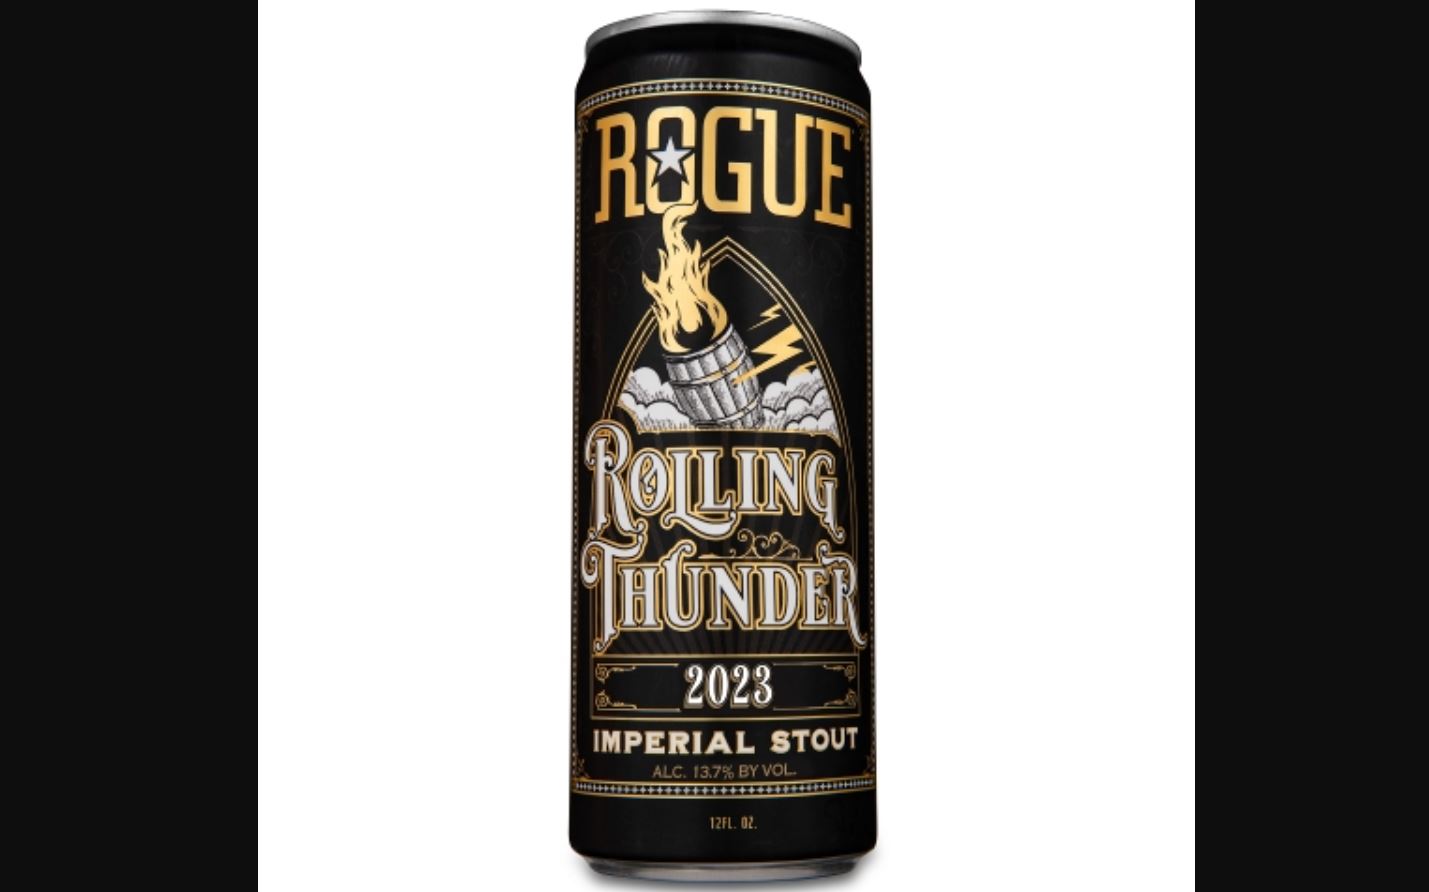 Rogue Rolling Thunder 2023 Imperial Stout